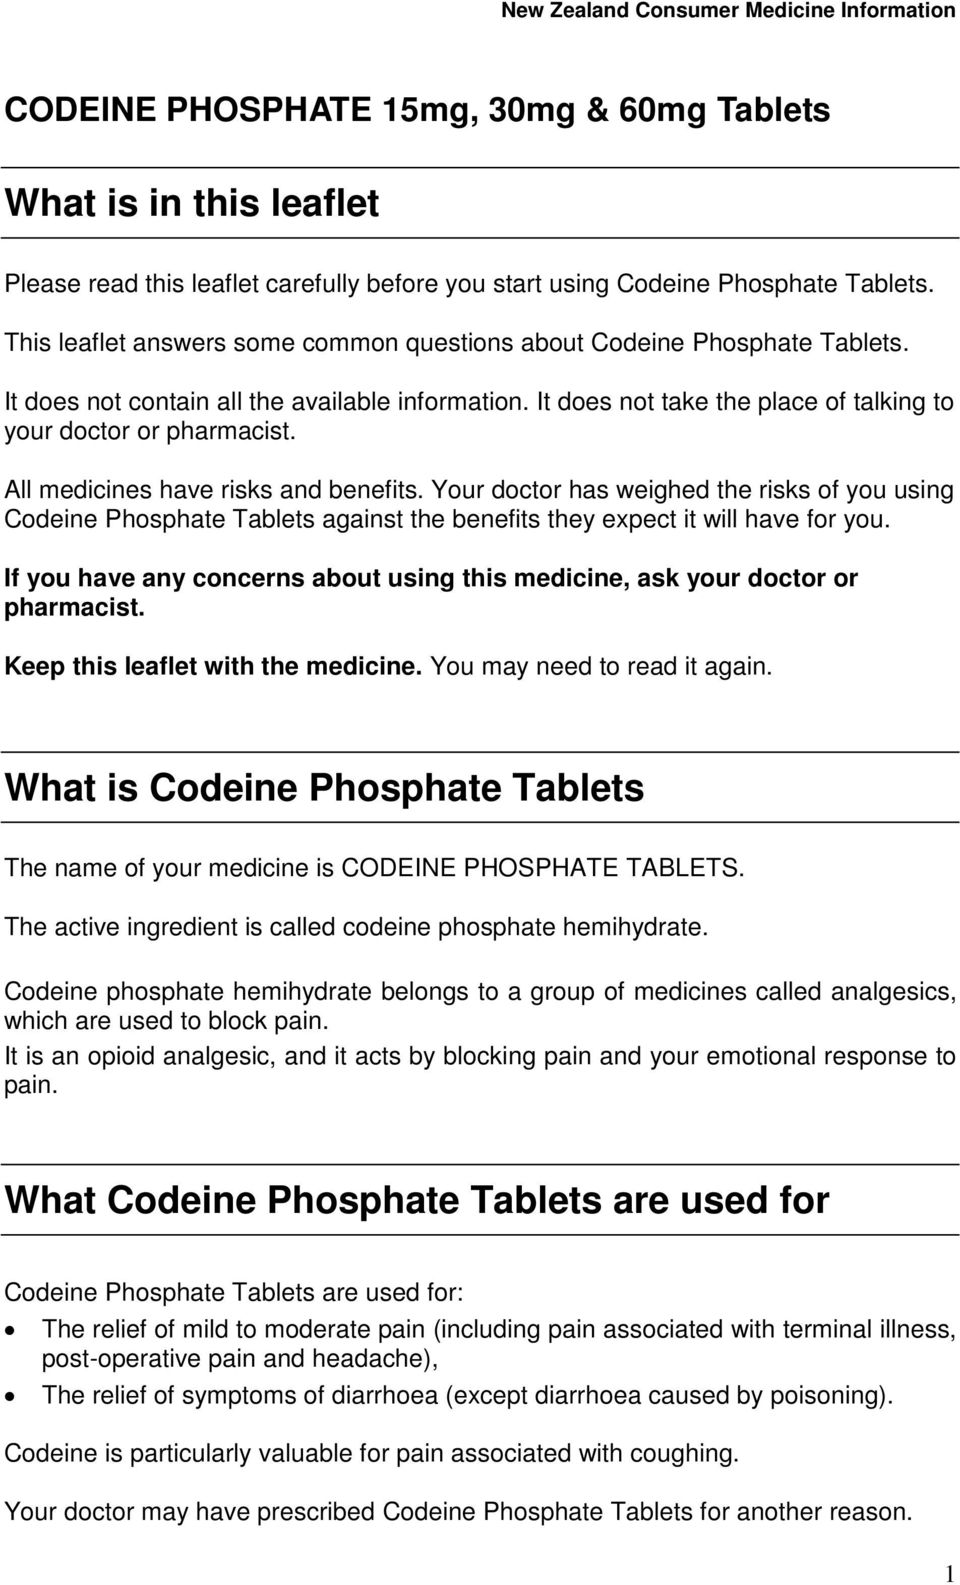 All medicines have risks and benefits. Your doctor has weighed the risks of you using Codeine Phosphate Tablets against the benefits they expect it will have for you.